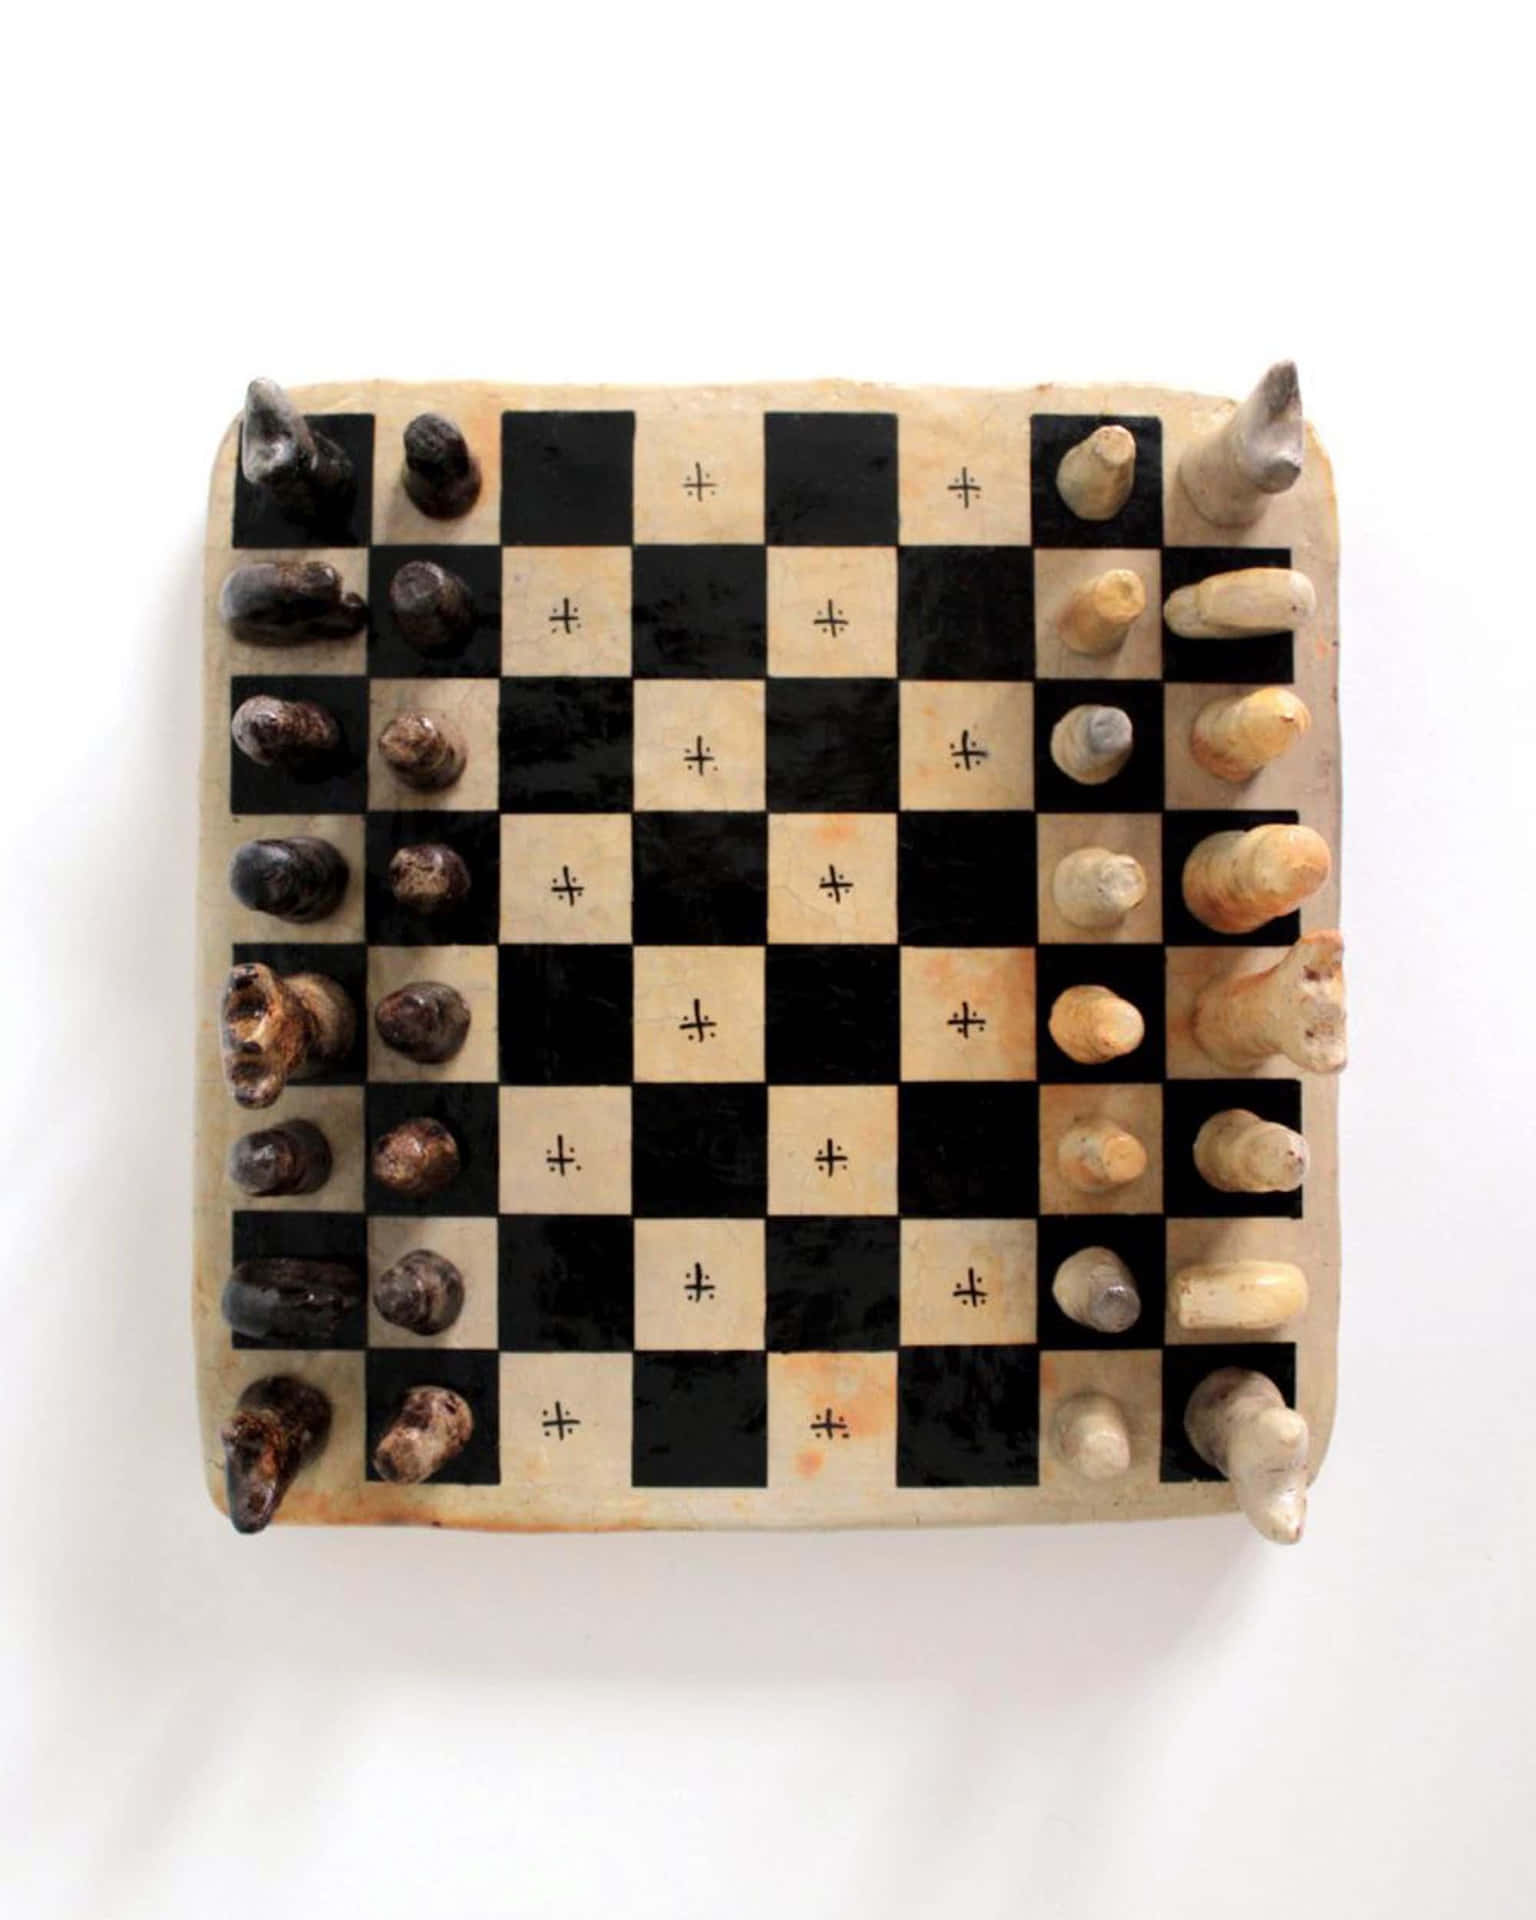 A Classic Game Of Chess On A Wooden Chessboard